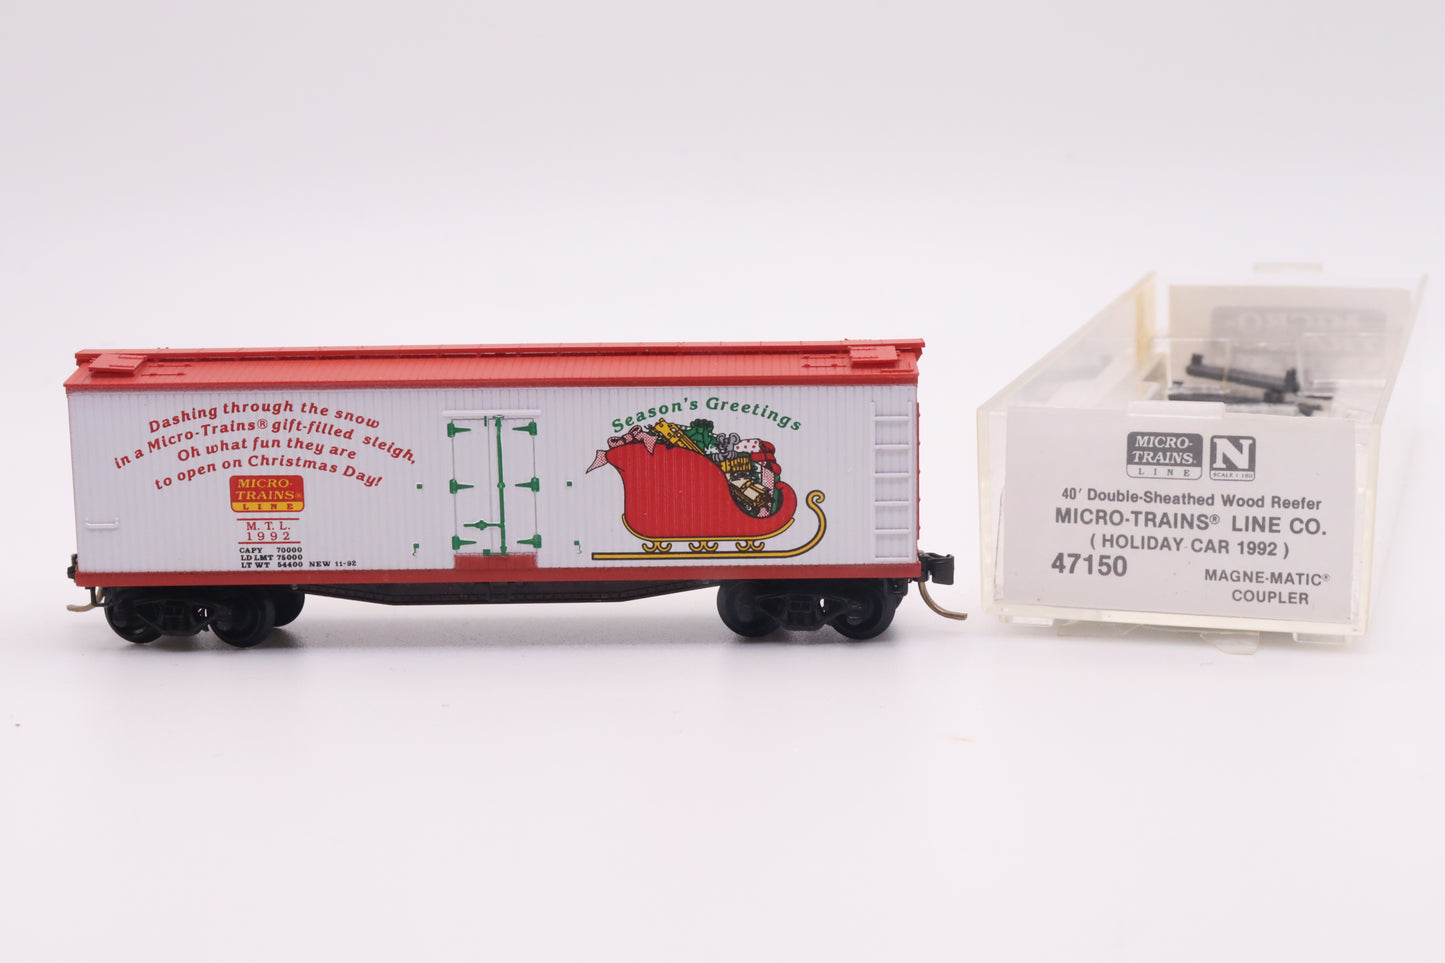 MTL-47150 - 40' Double-Sheathed Wood Reefer - Micro-Trains Holiday Car 1992 - MTL-1992